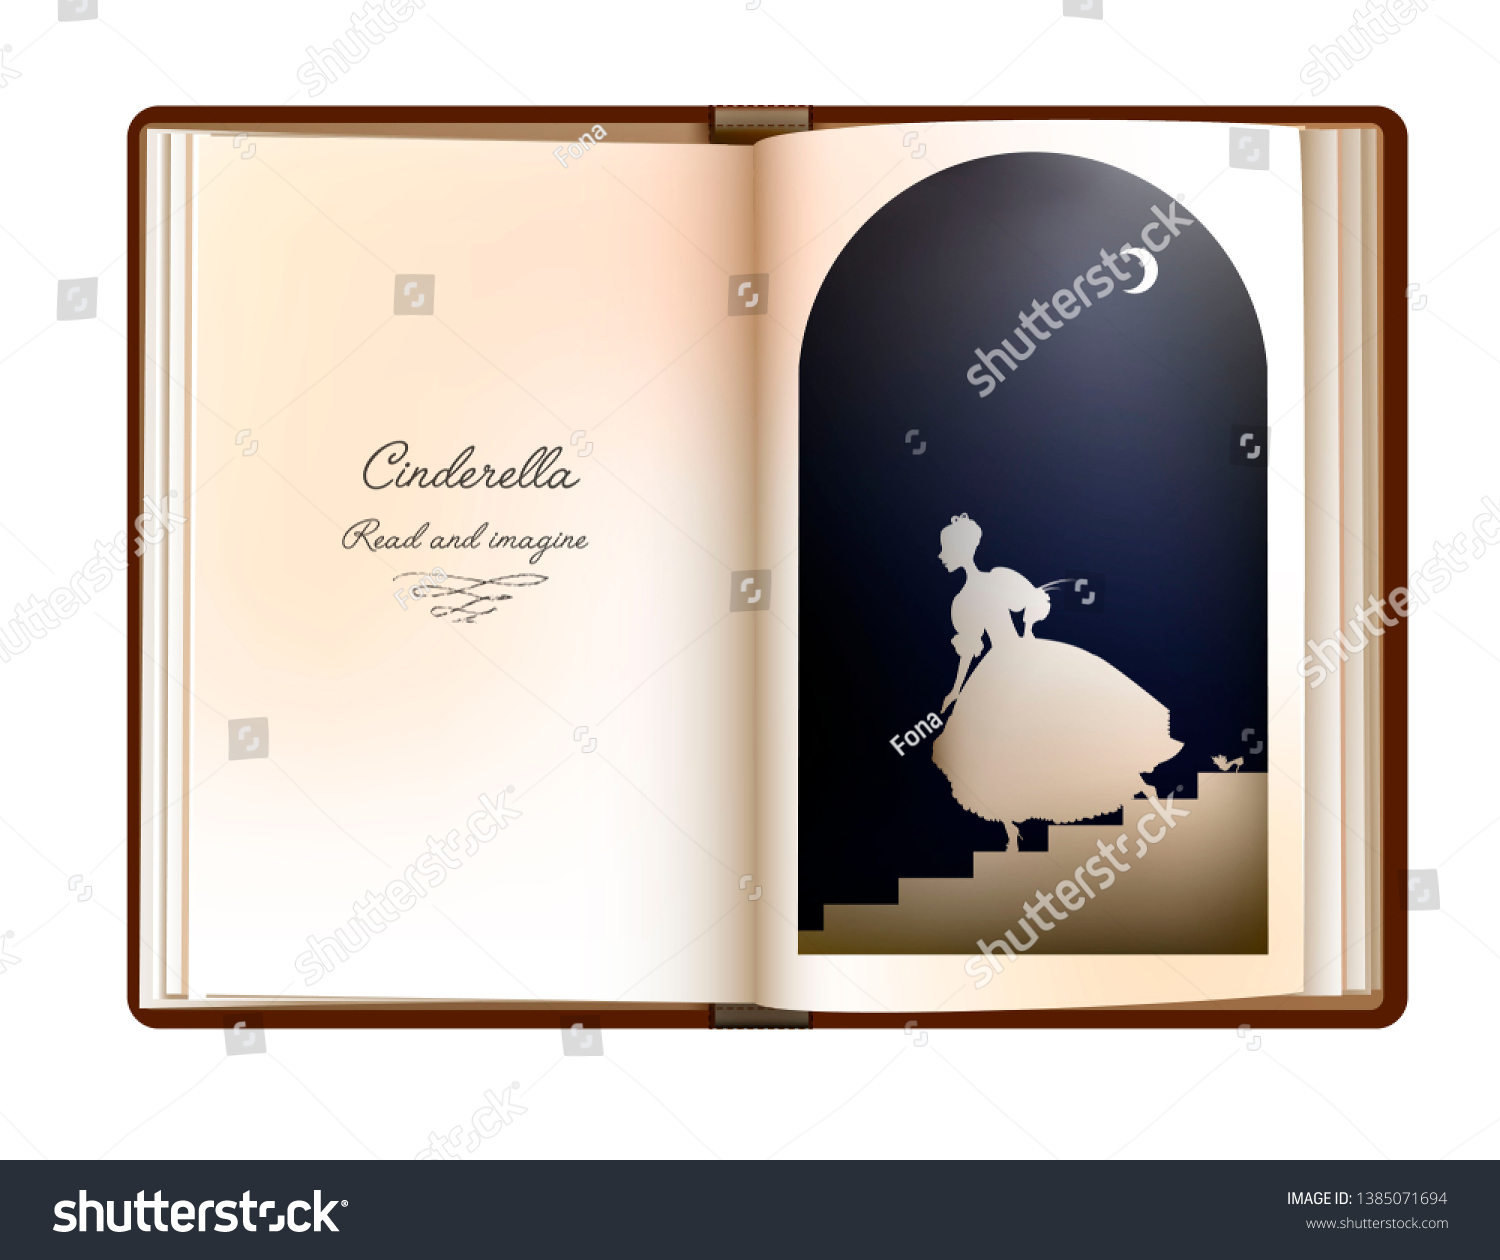 SVG of Cinderalla story idea, reading and imagination concept, vintage empty book page looks like arch window with cindarella silhouette, vector svg